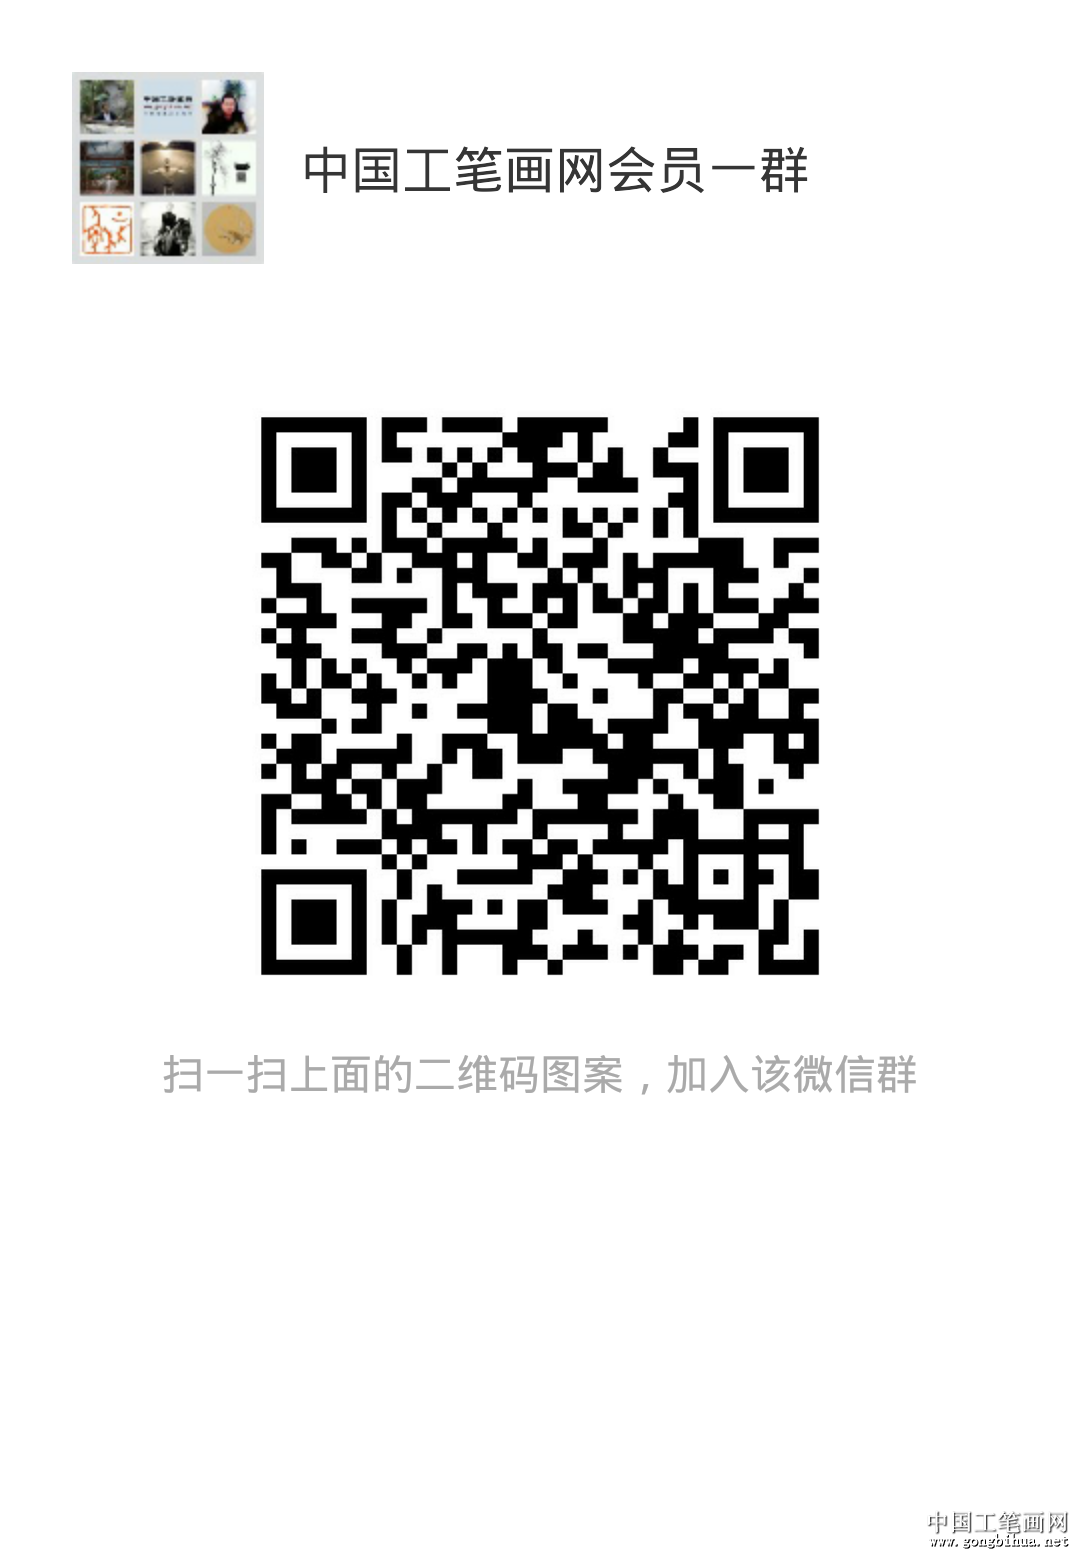 mmqrcode1414828002498.png